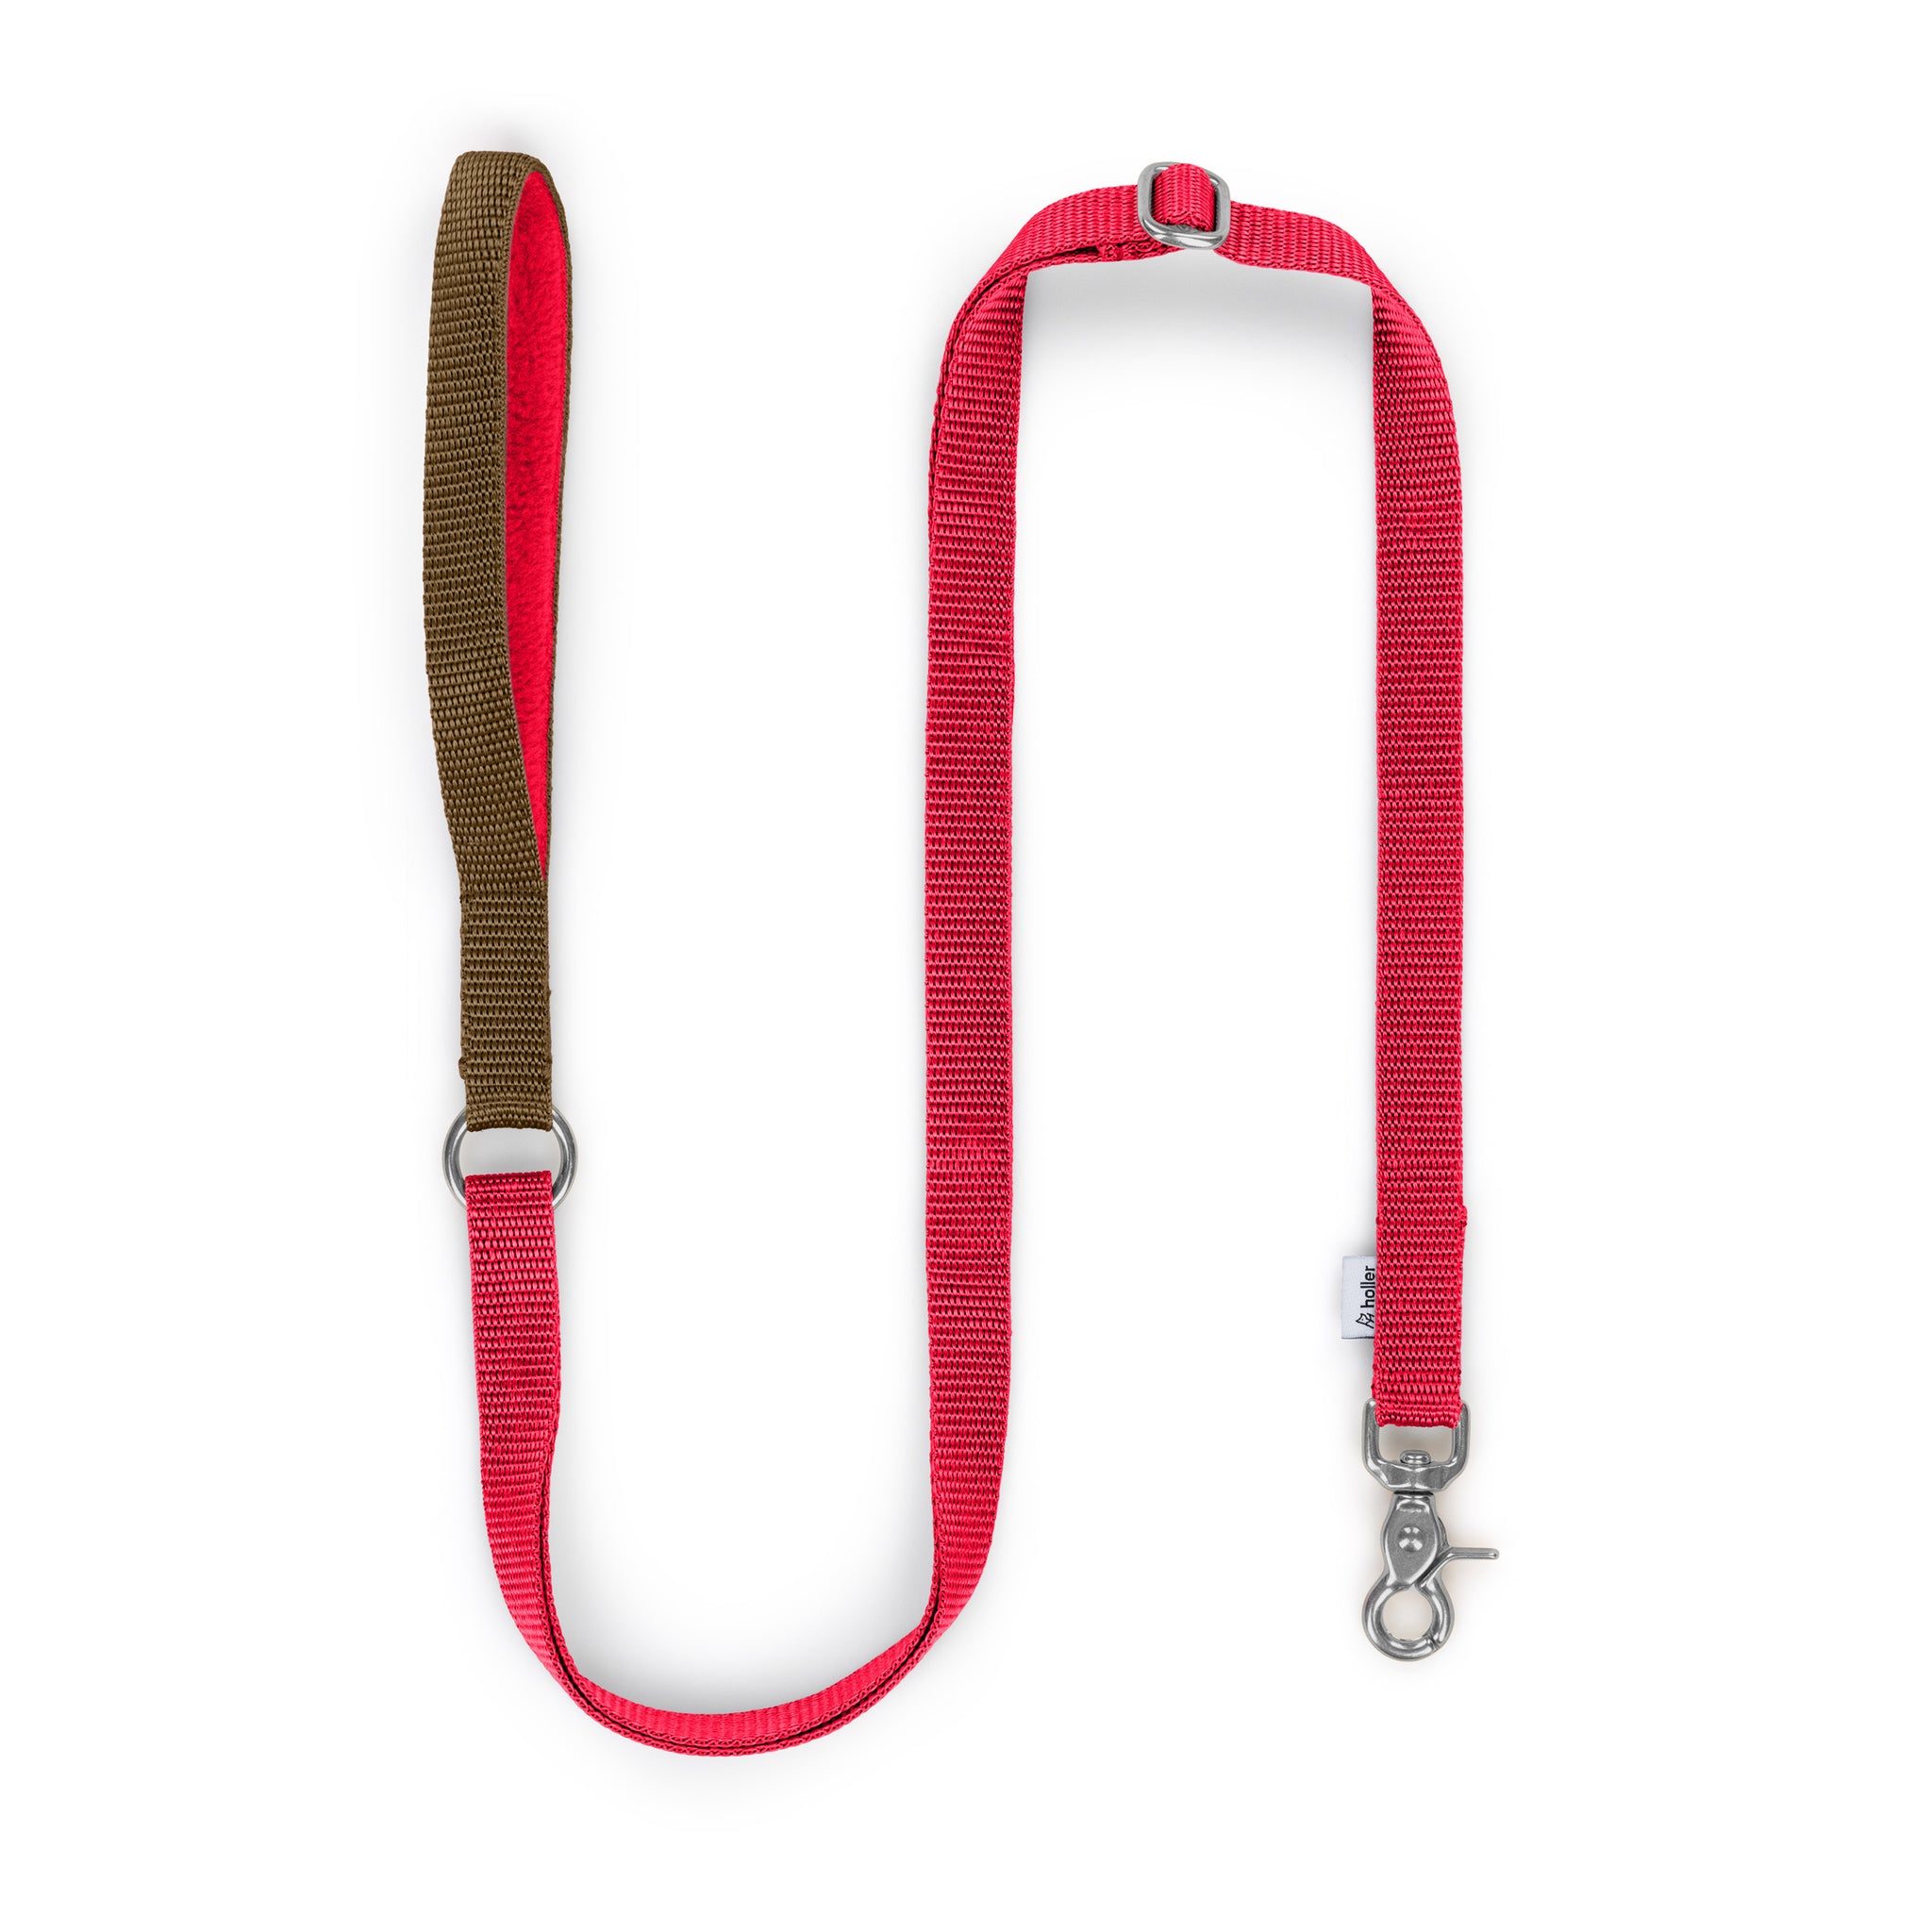 Red + Beige Custom-made Extendable Lead - With Soft Touch Handle. - Pet Leashes - Holler Brighton - Holler Brighton